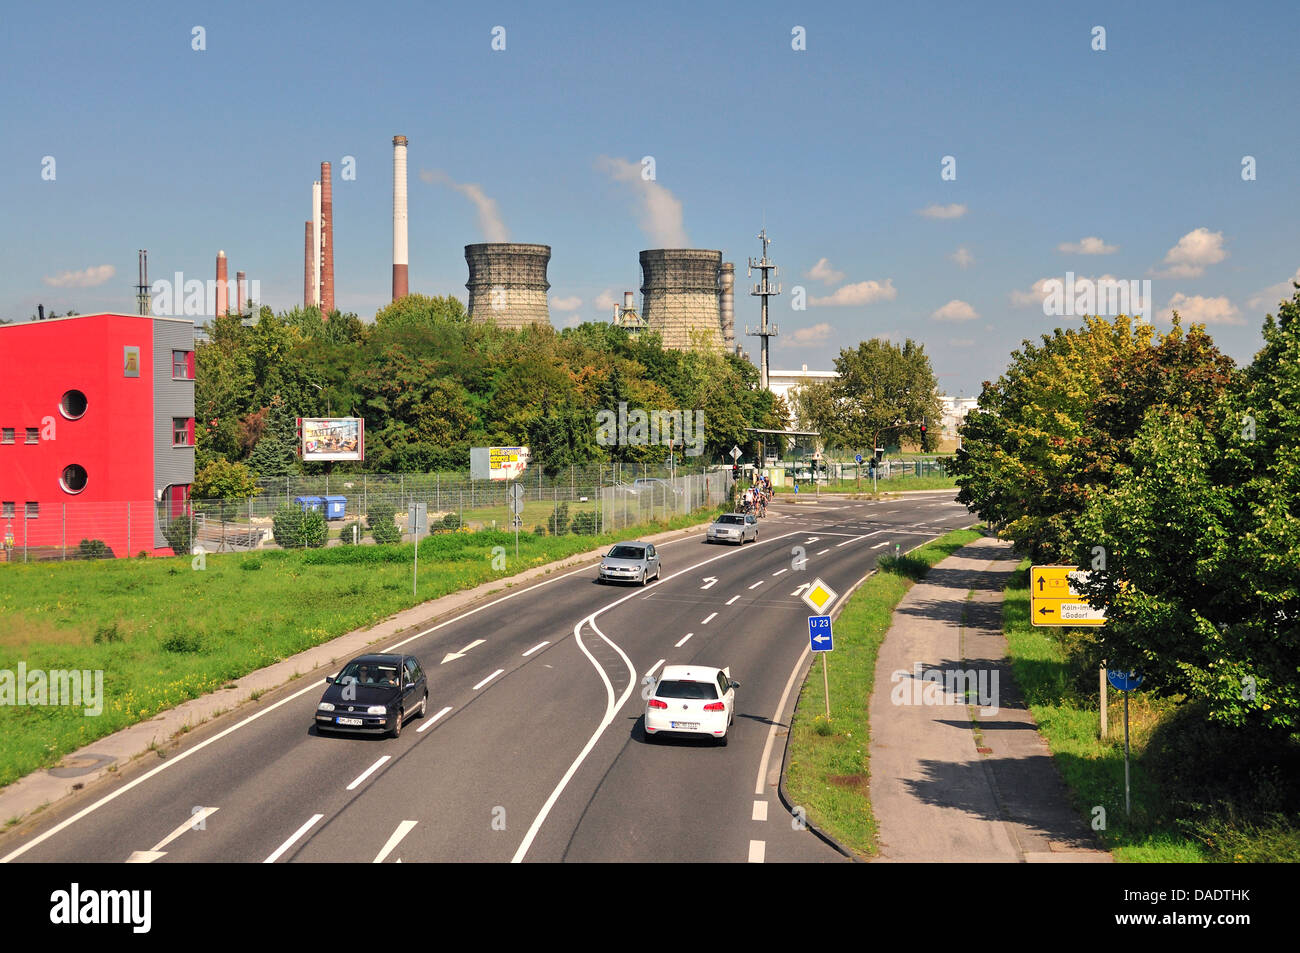 road traffic in front of the vent stacks and burners of an oil refinery, Germany, North Rhine-Westphalia, Godorf bei Wesseling Stock Photo